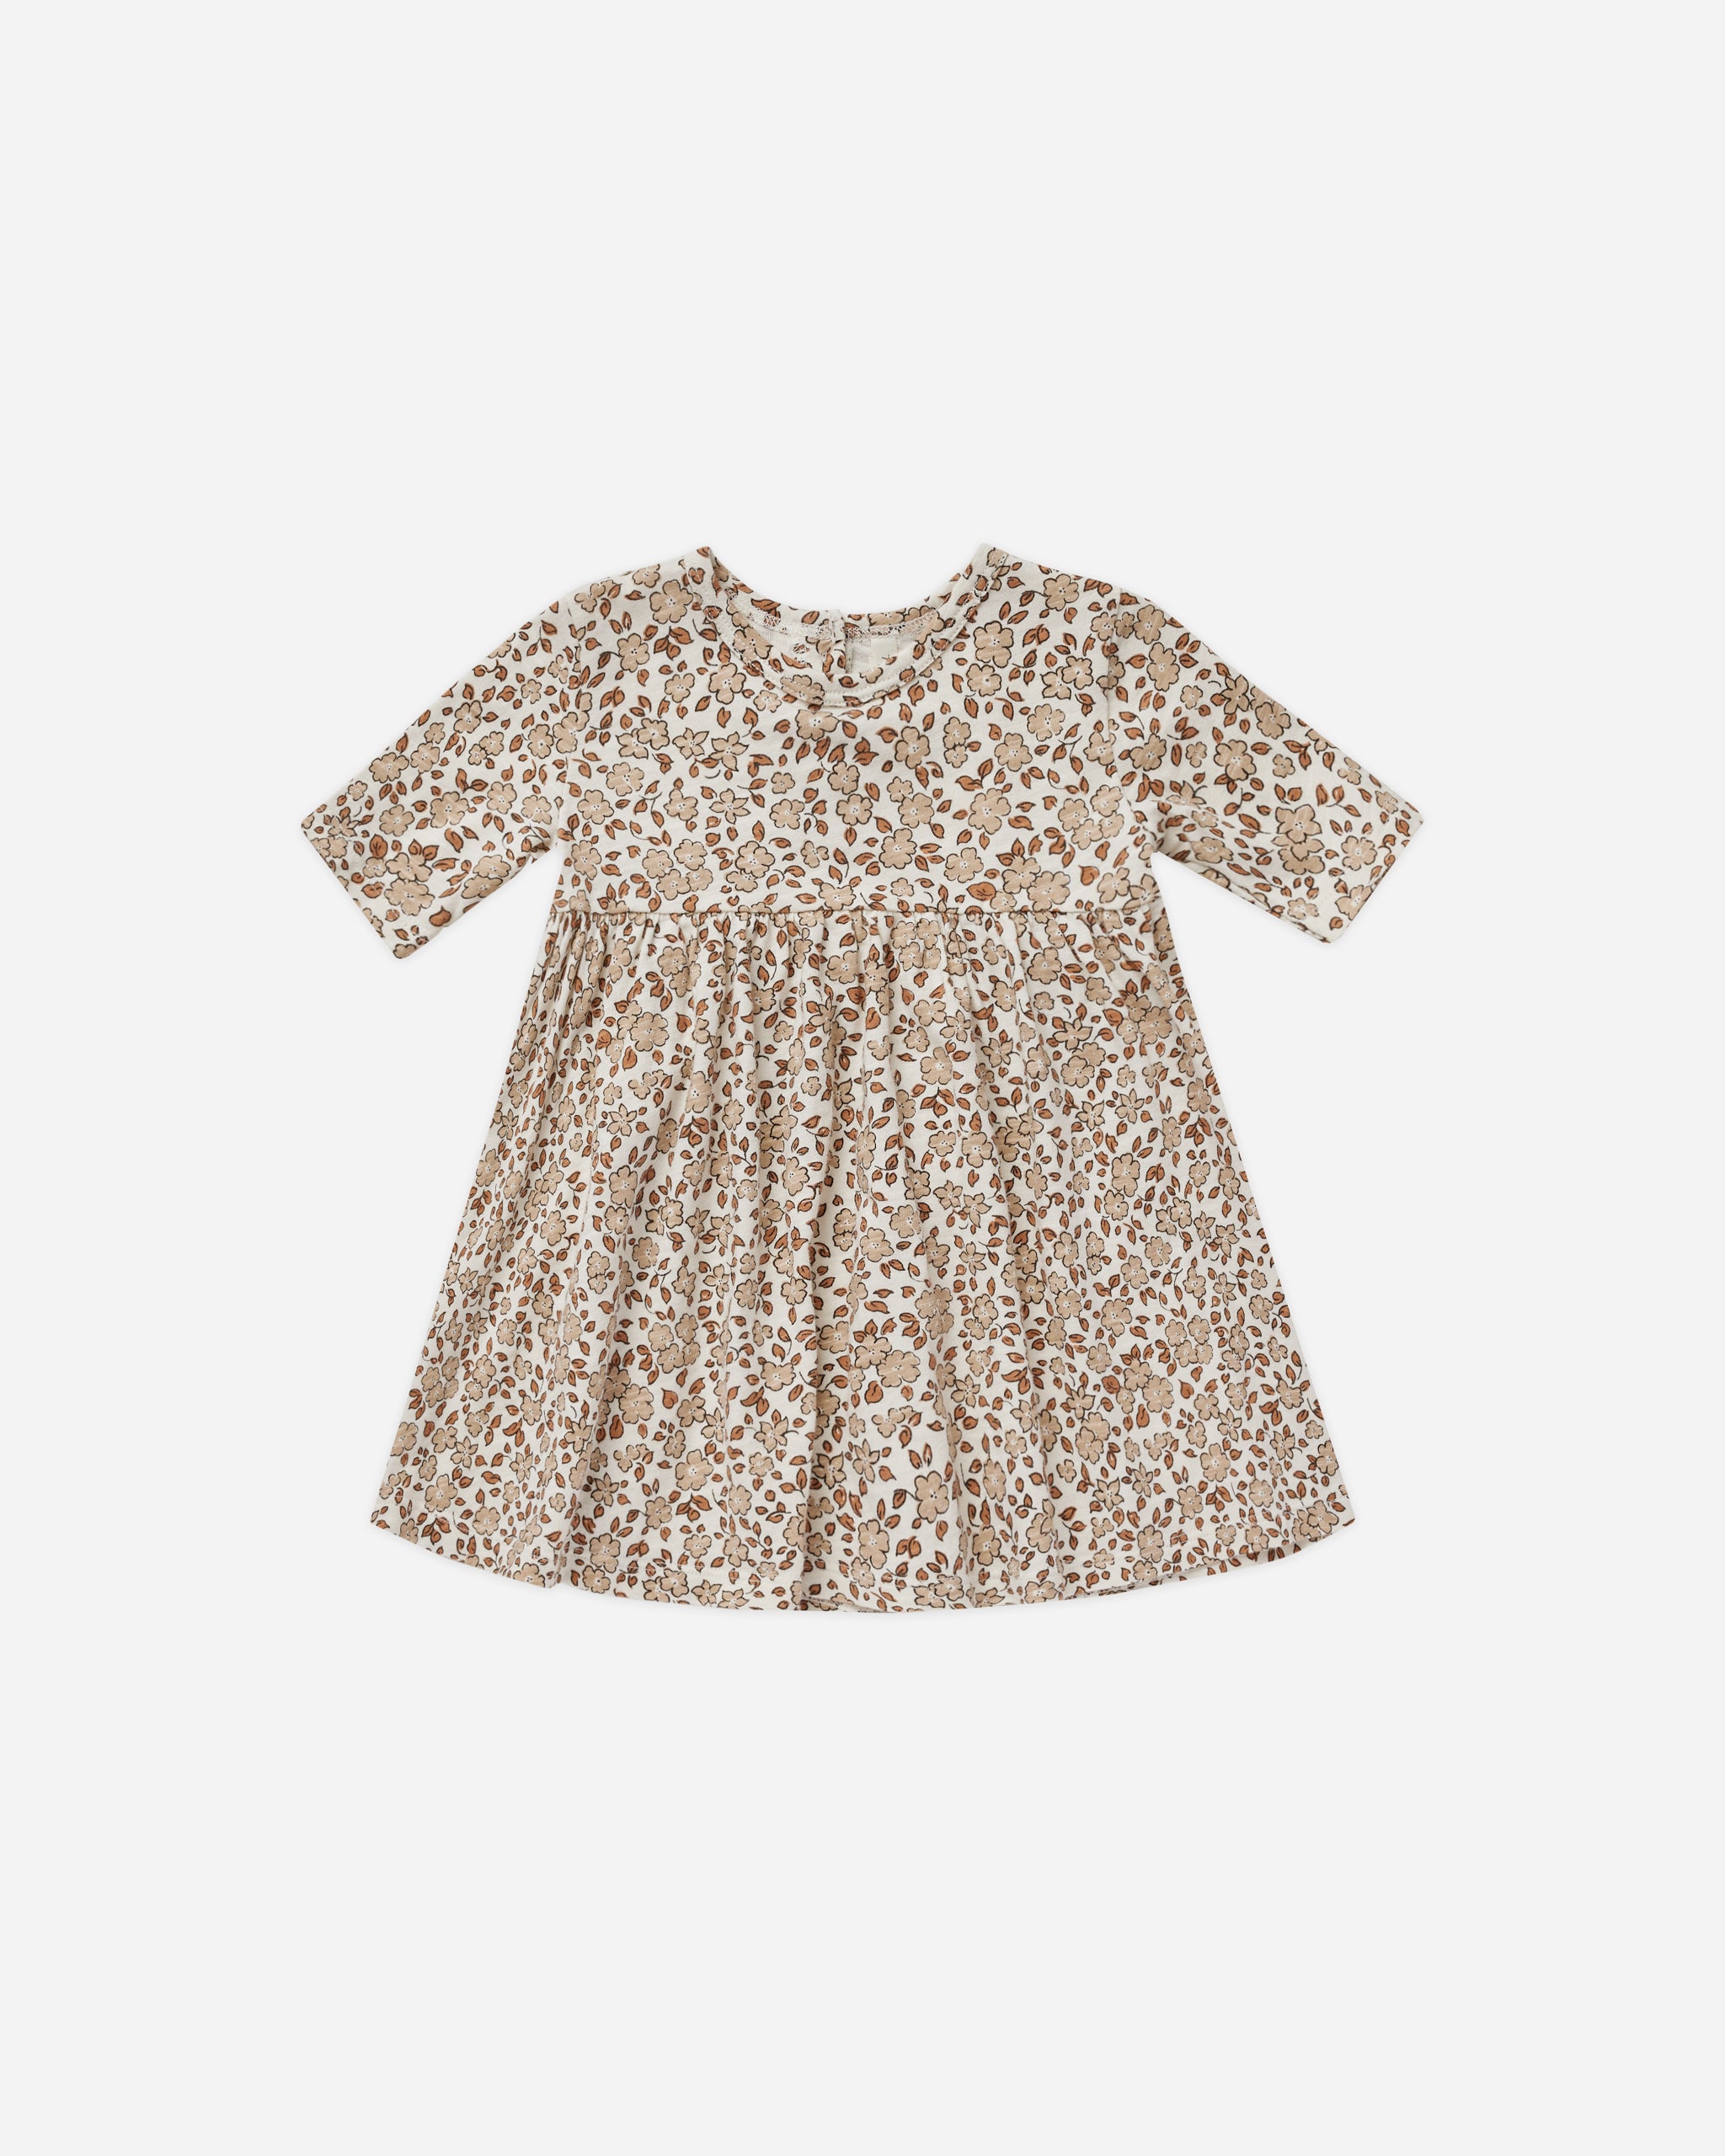 Finn Dress || Harvest Floral - Rylee + Cru | Kids Clothes | Trendy Baby Clothes | Modern Infant Outfits |